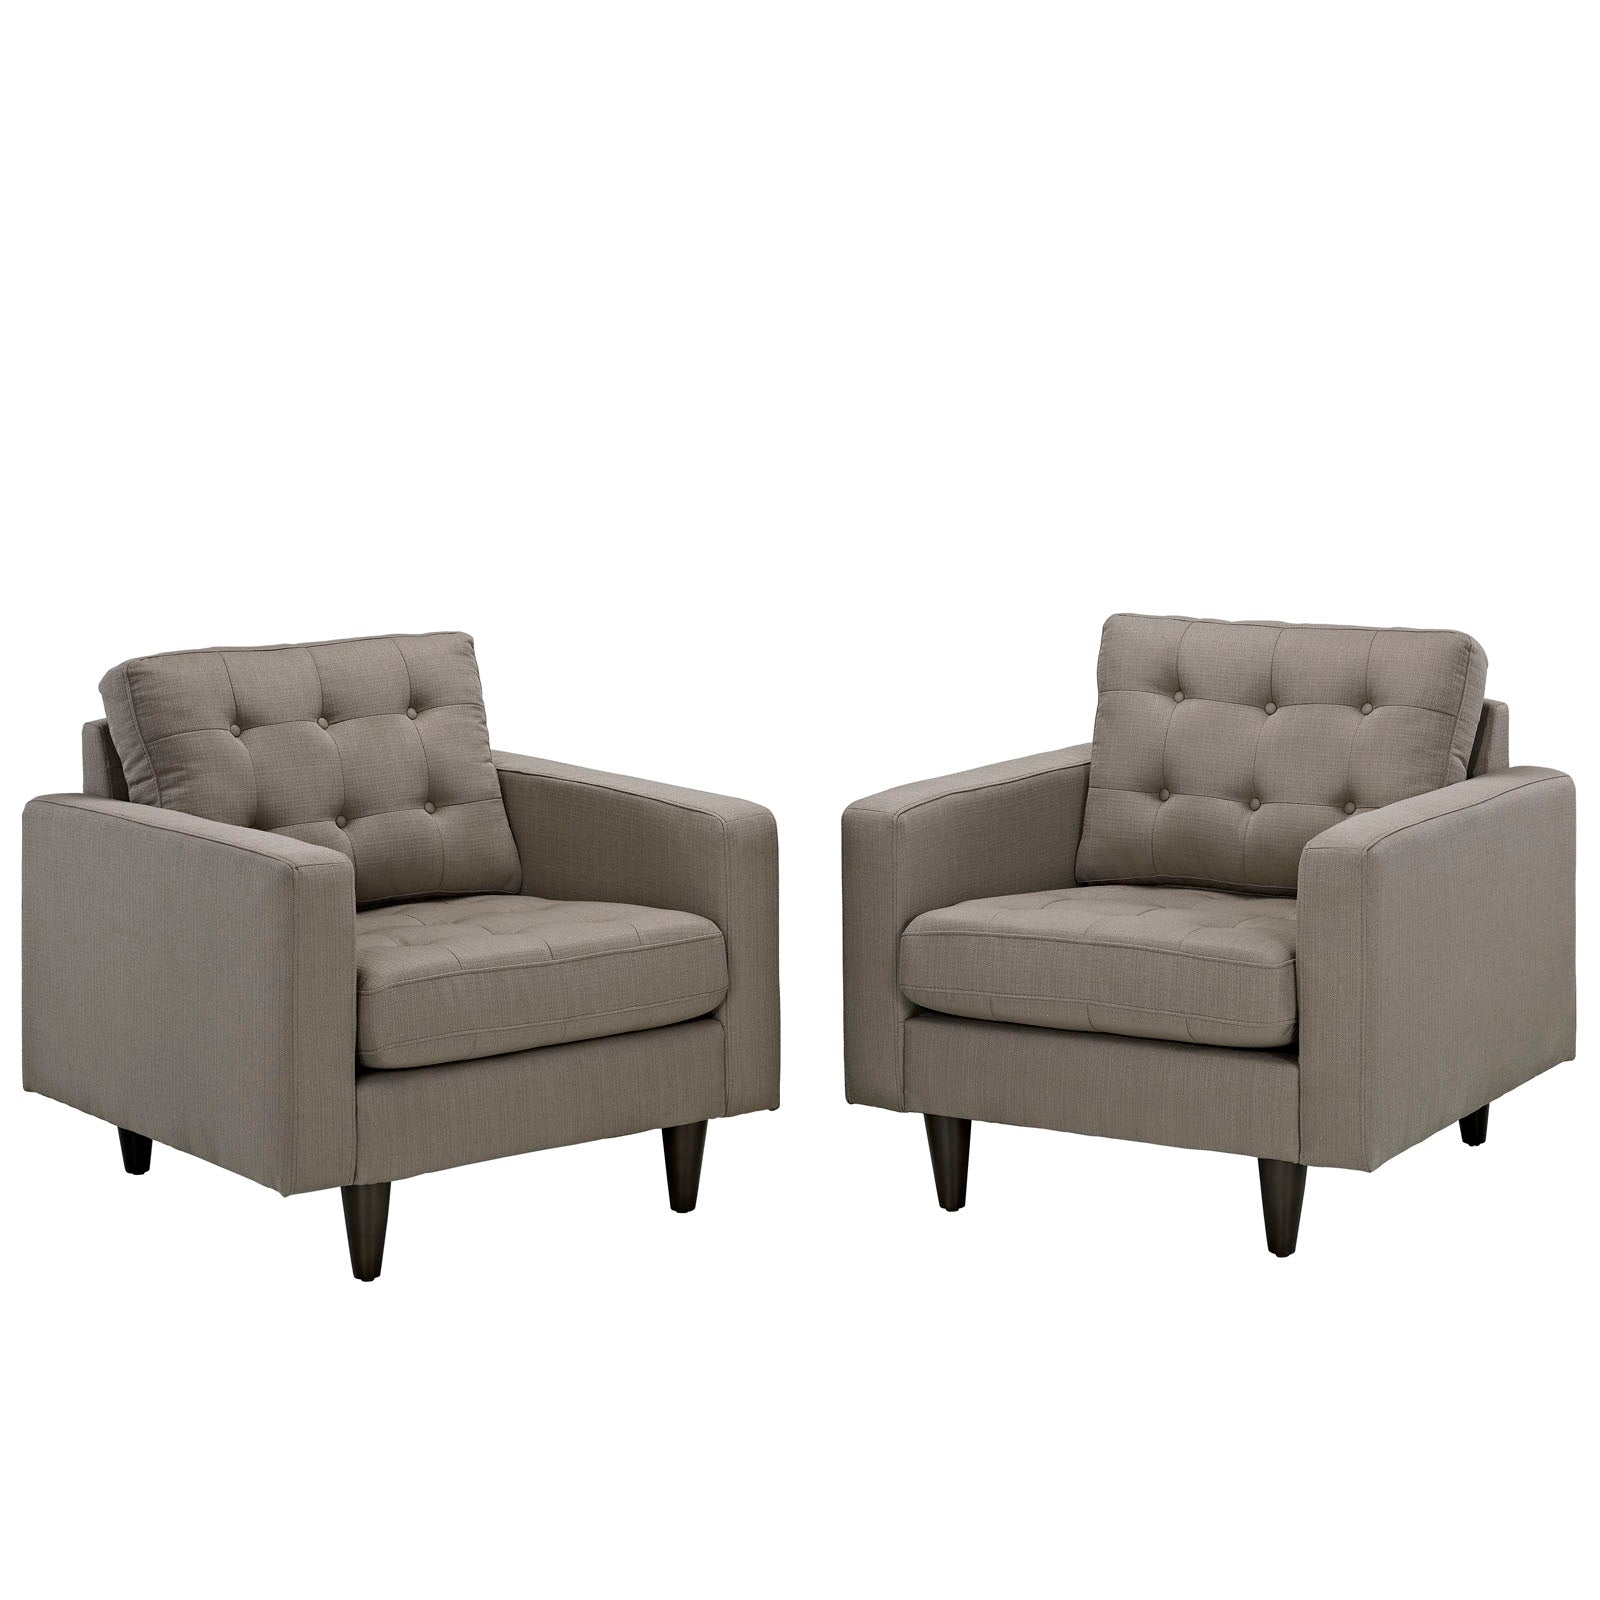 Funkeen Modern Accent Chair Set of 2 Comfortable Button Tufted Reading Sofa  Chair Comfy Upholstered Linen Fabric Arm Chair Bedrooms Living Room Chairs